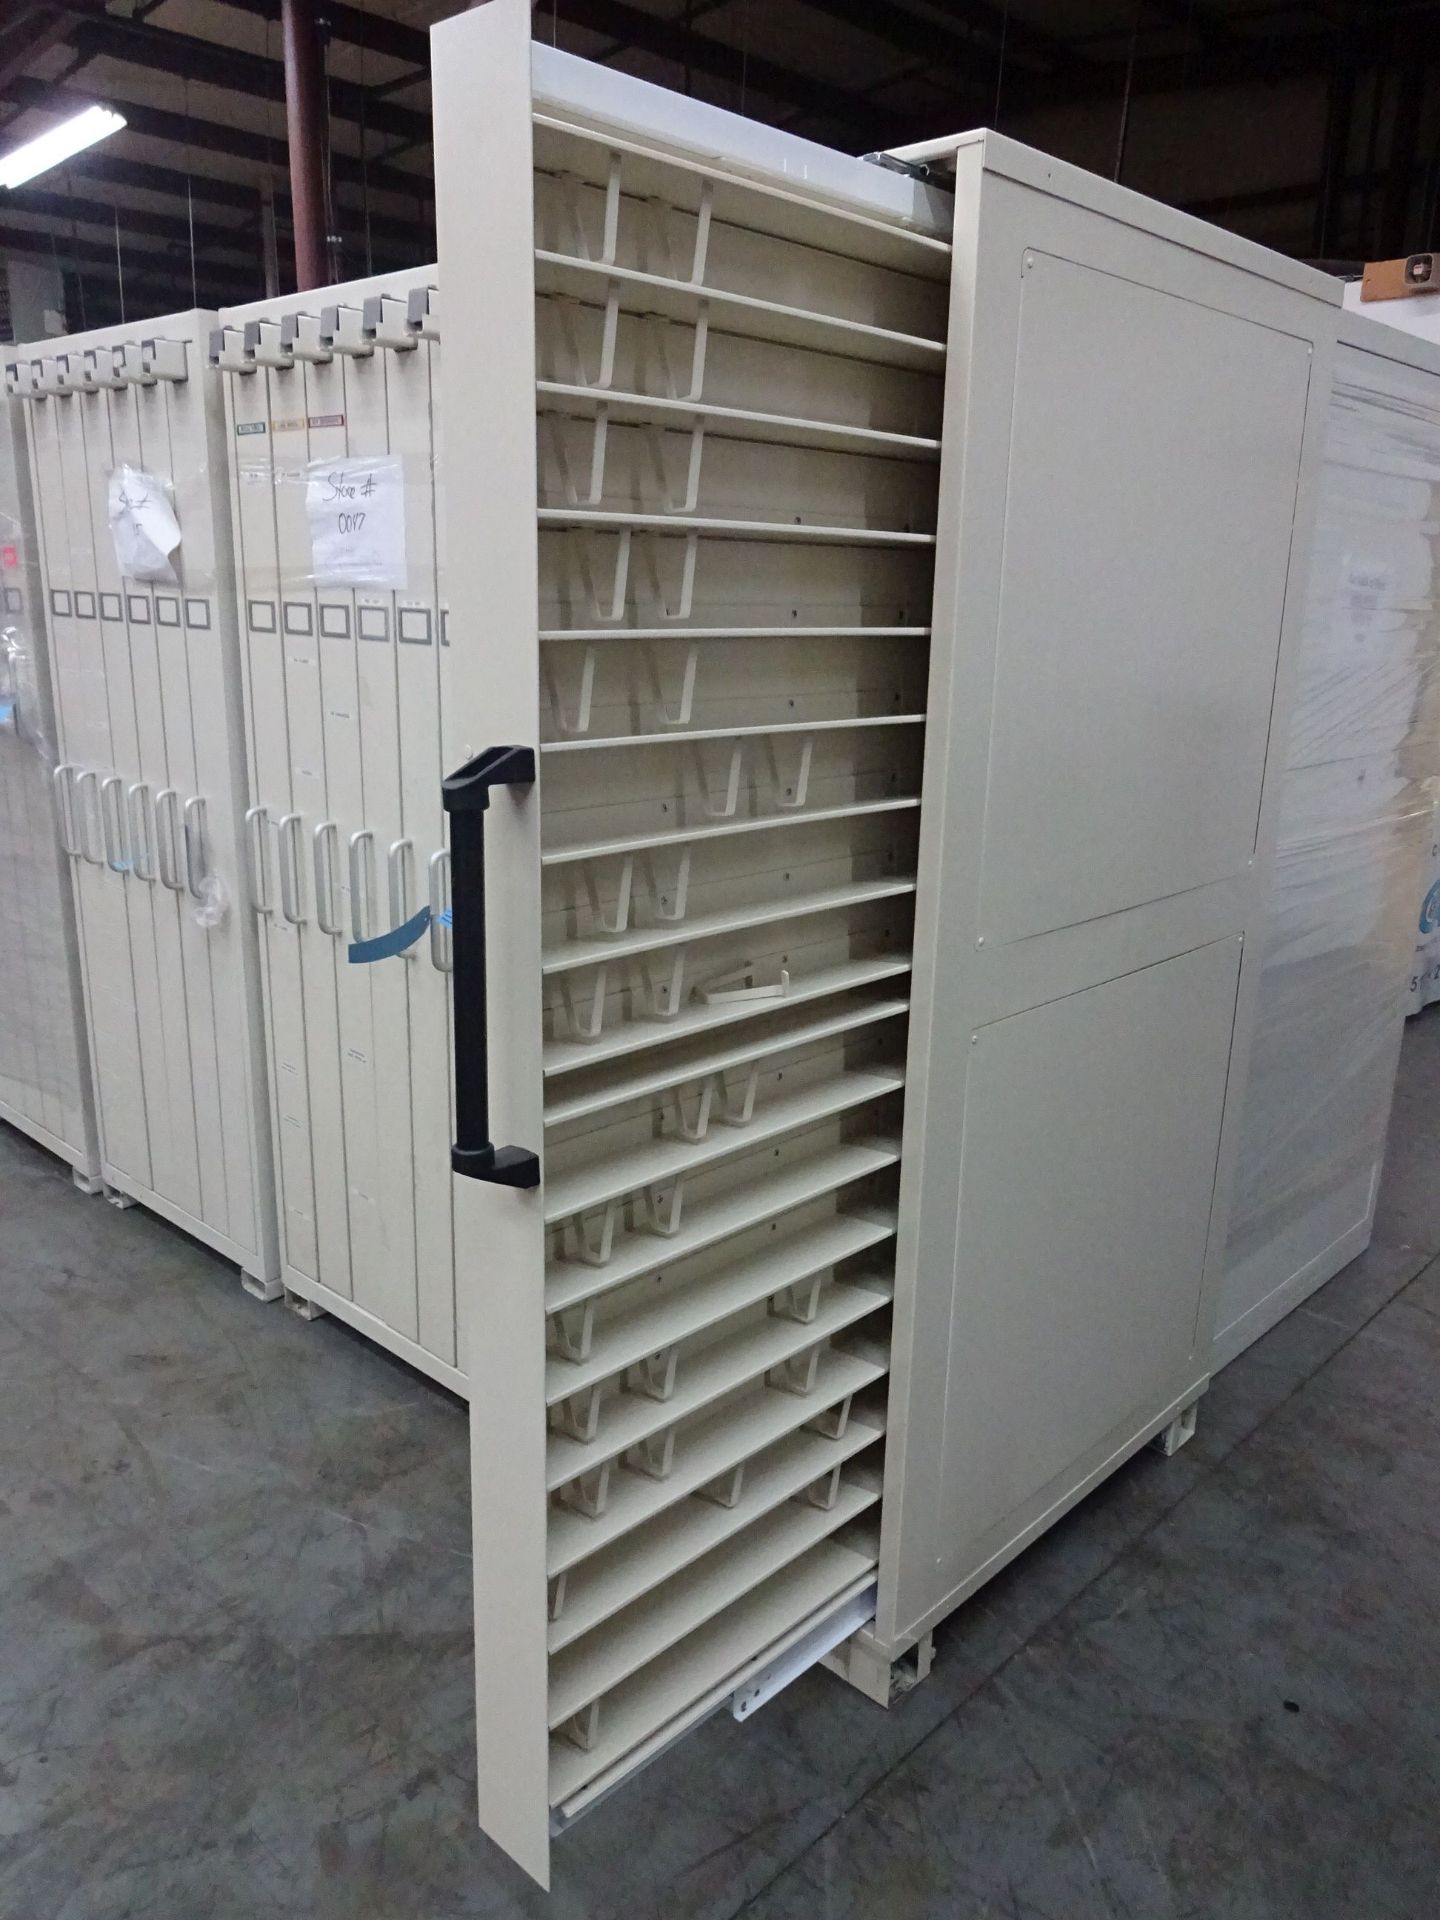 34" X 44" X 80" HIGH 6-DRAWER RUSS BASSETT VERTICAL OPTICAL MEDIA CABINET **LOCATED AT 6600 STOCKTON - Image 2 of 4